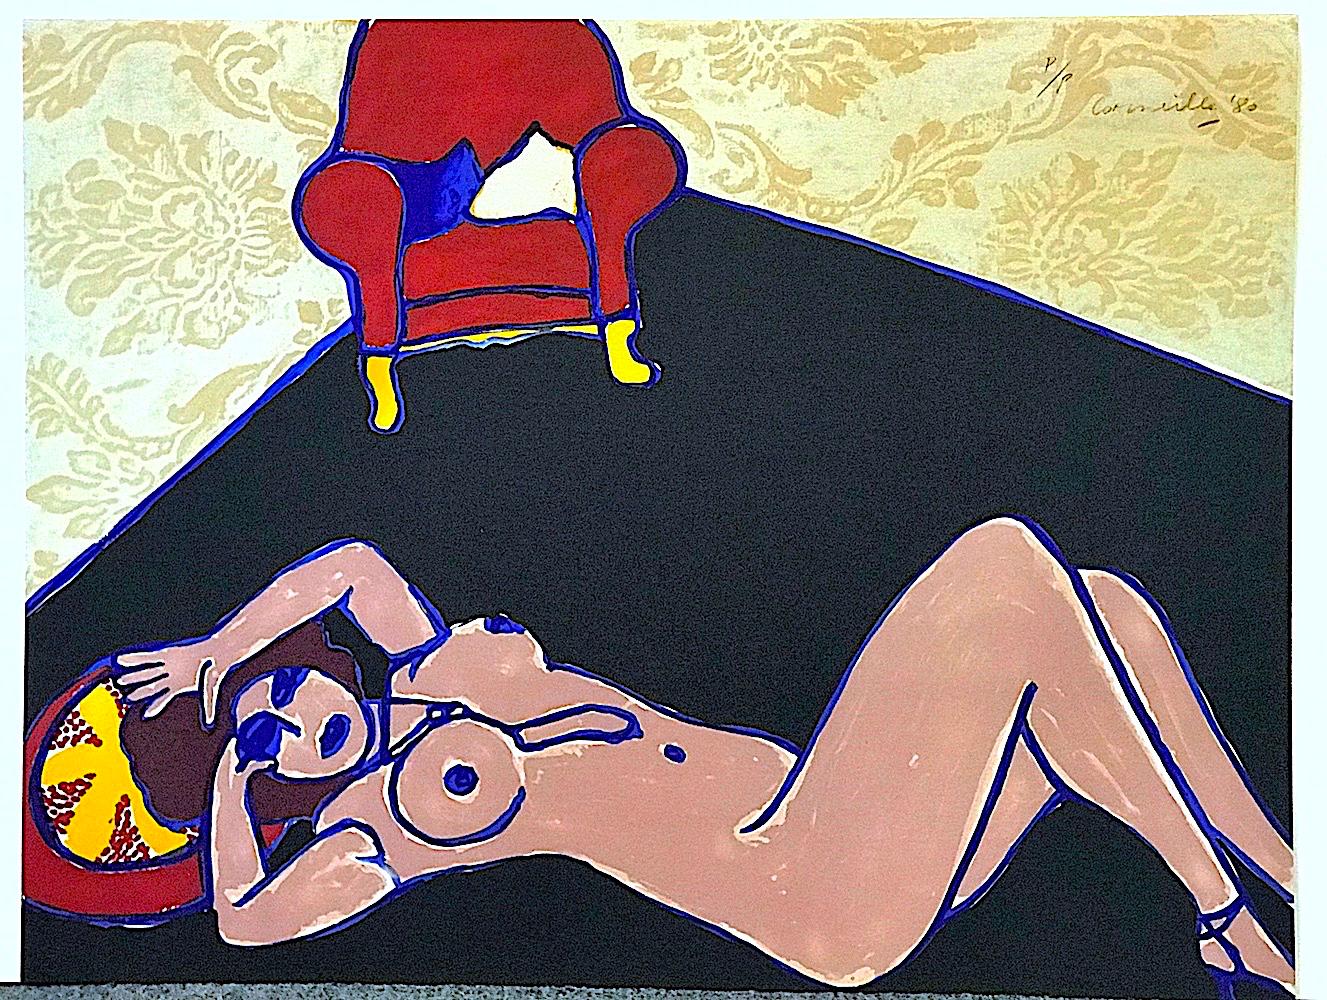 LE TAPIS NOIR Signed Lithograph, Reclining Nude, Damask Wallpaper, Red Armchair - Orange Nude Print by Corneille